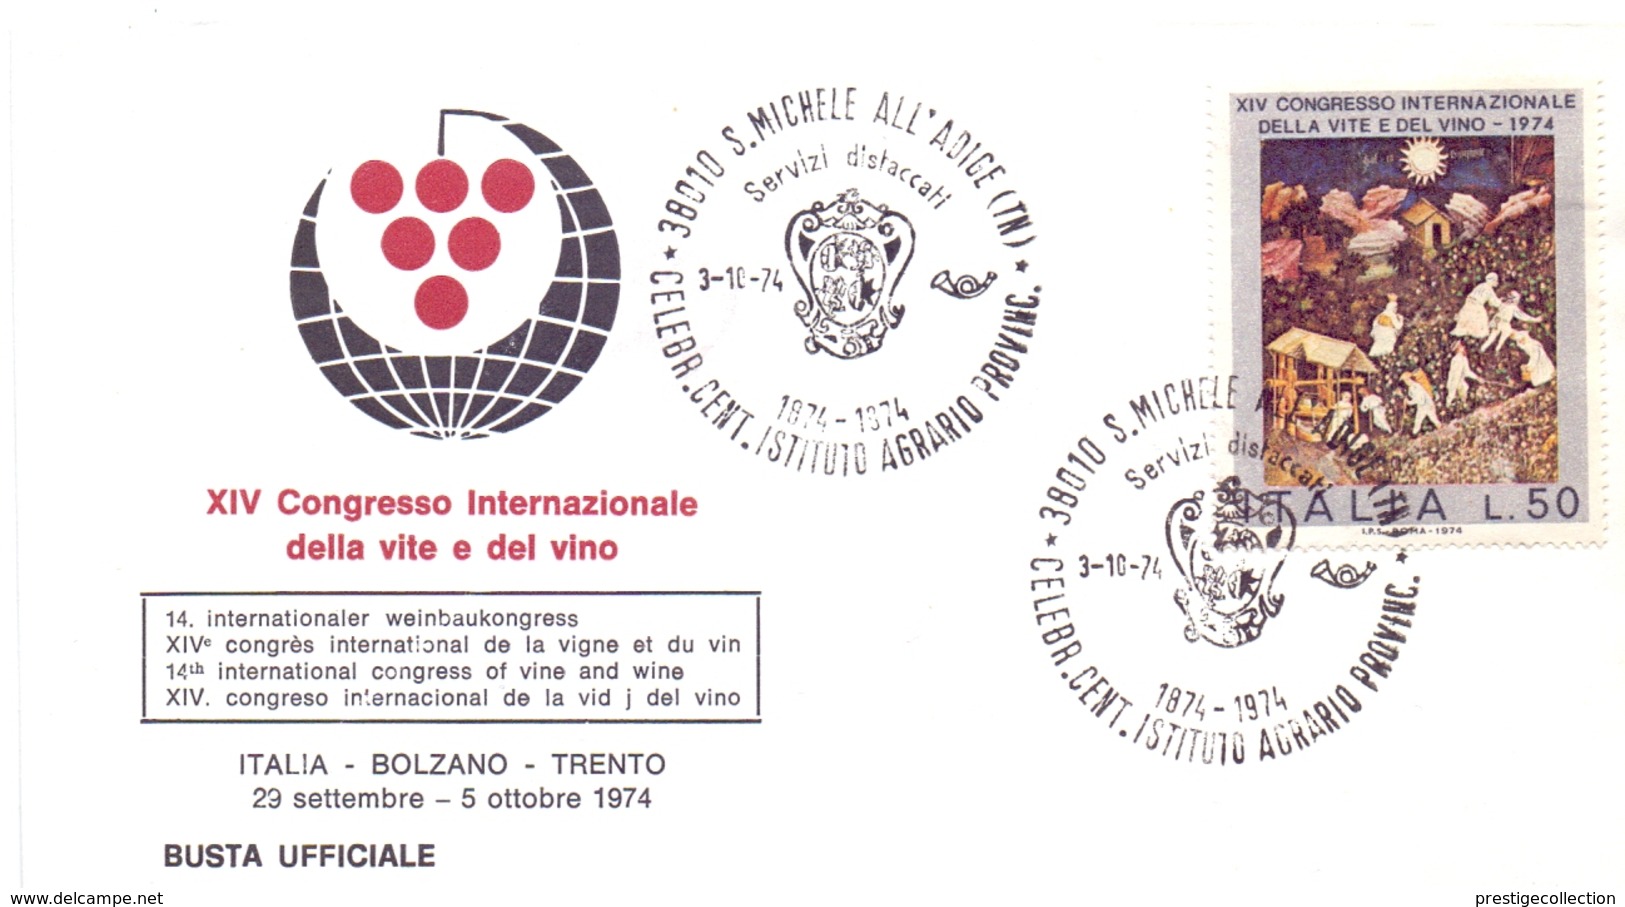 S.MICHELE ALL'ADIGE CENT. INSTITUTE AGRICOLTURAL 1974  (GEN170169) - Agricoltura